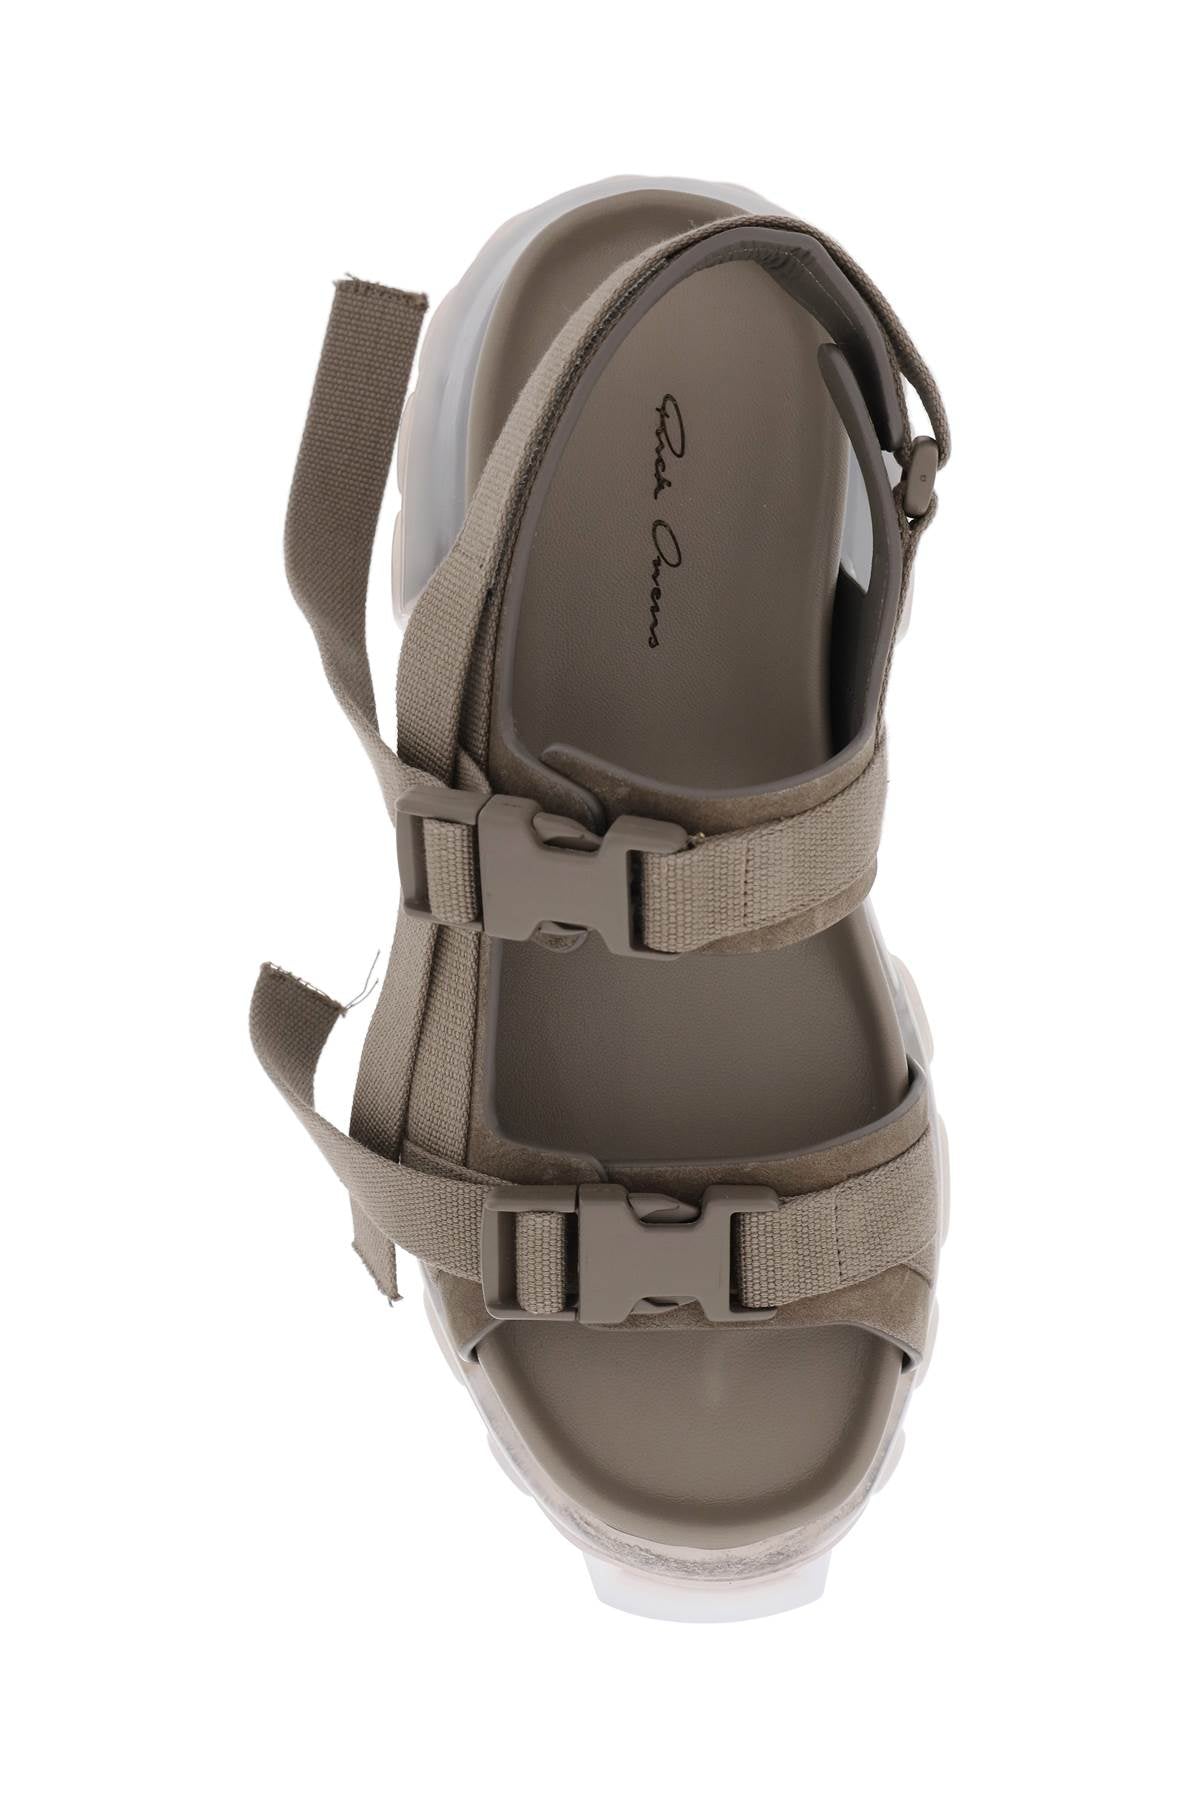 Rick Owens Rick owens sandals with tractor sole